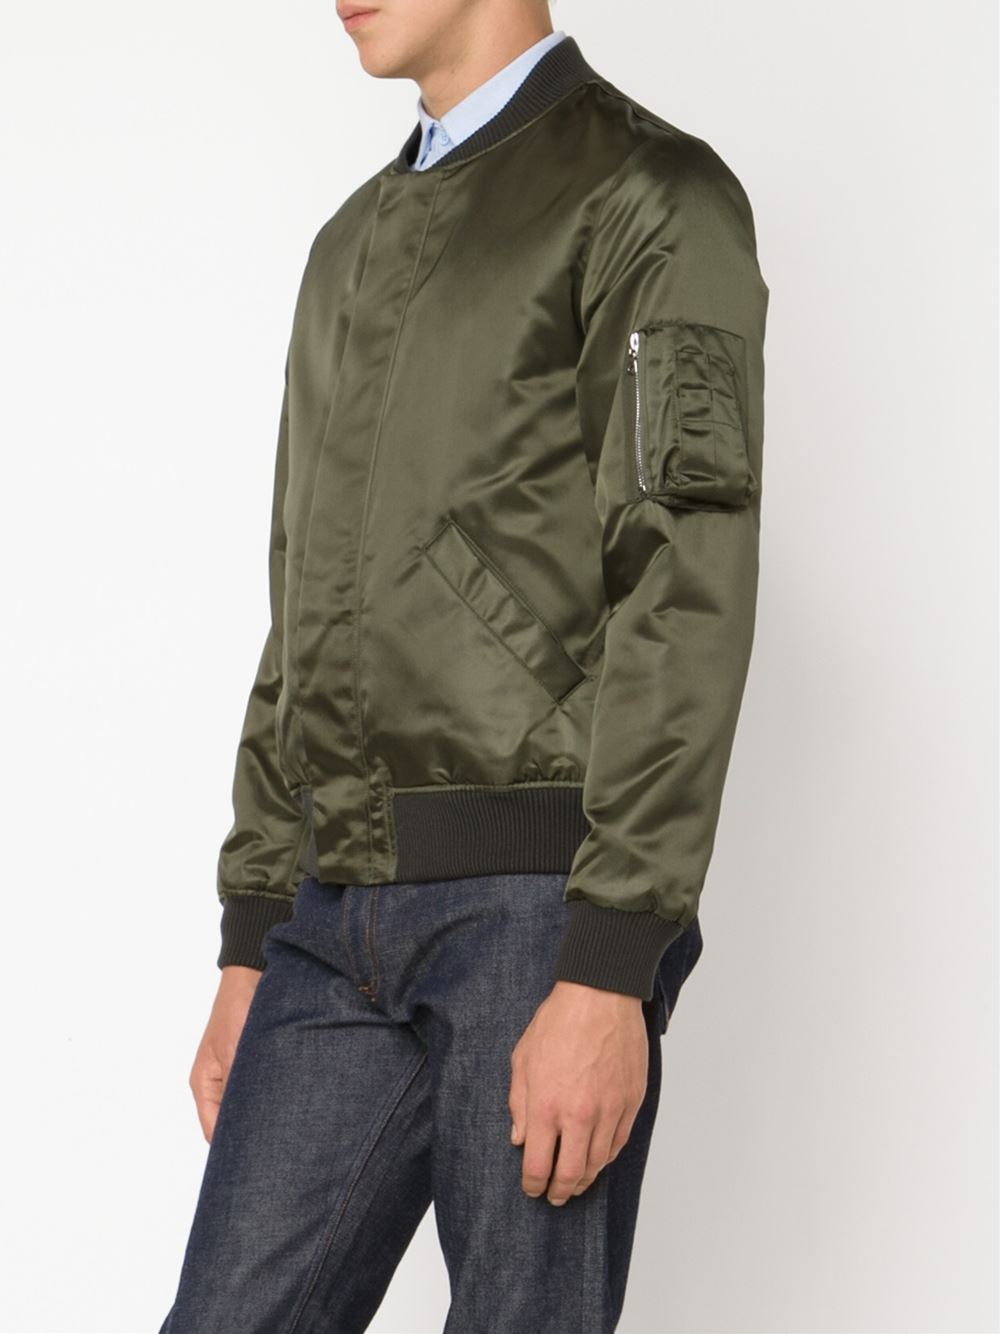 A.P.C. Classic Bomber Jacket in Green for Men - Lyst